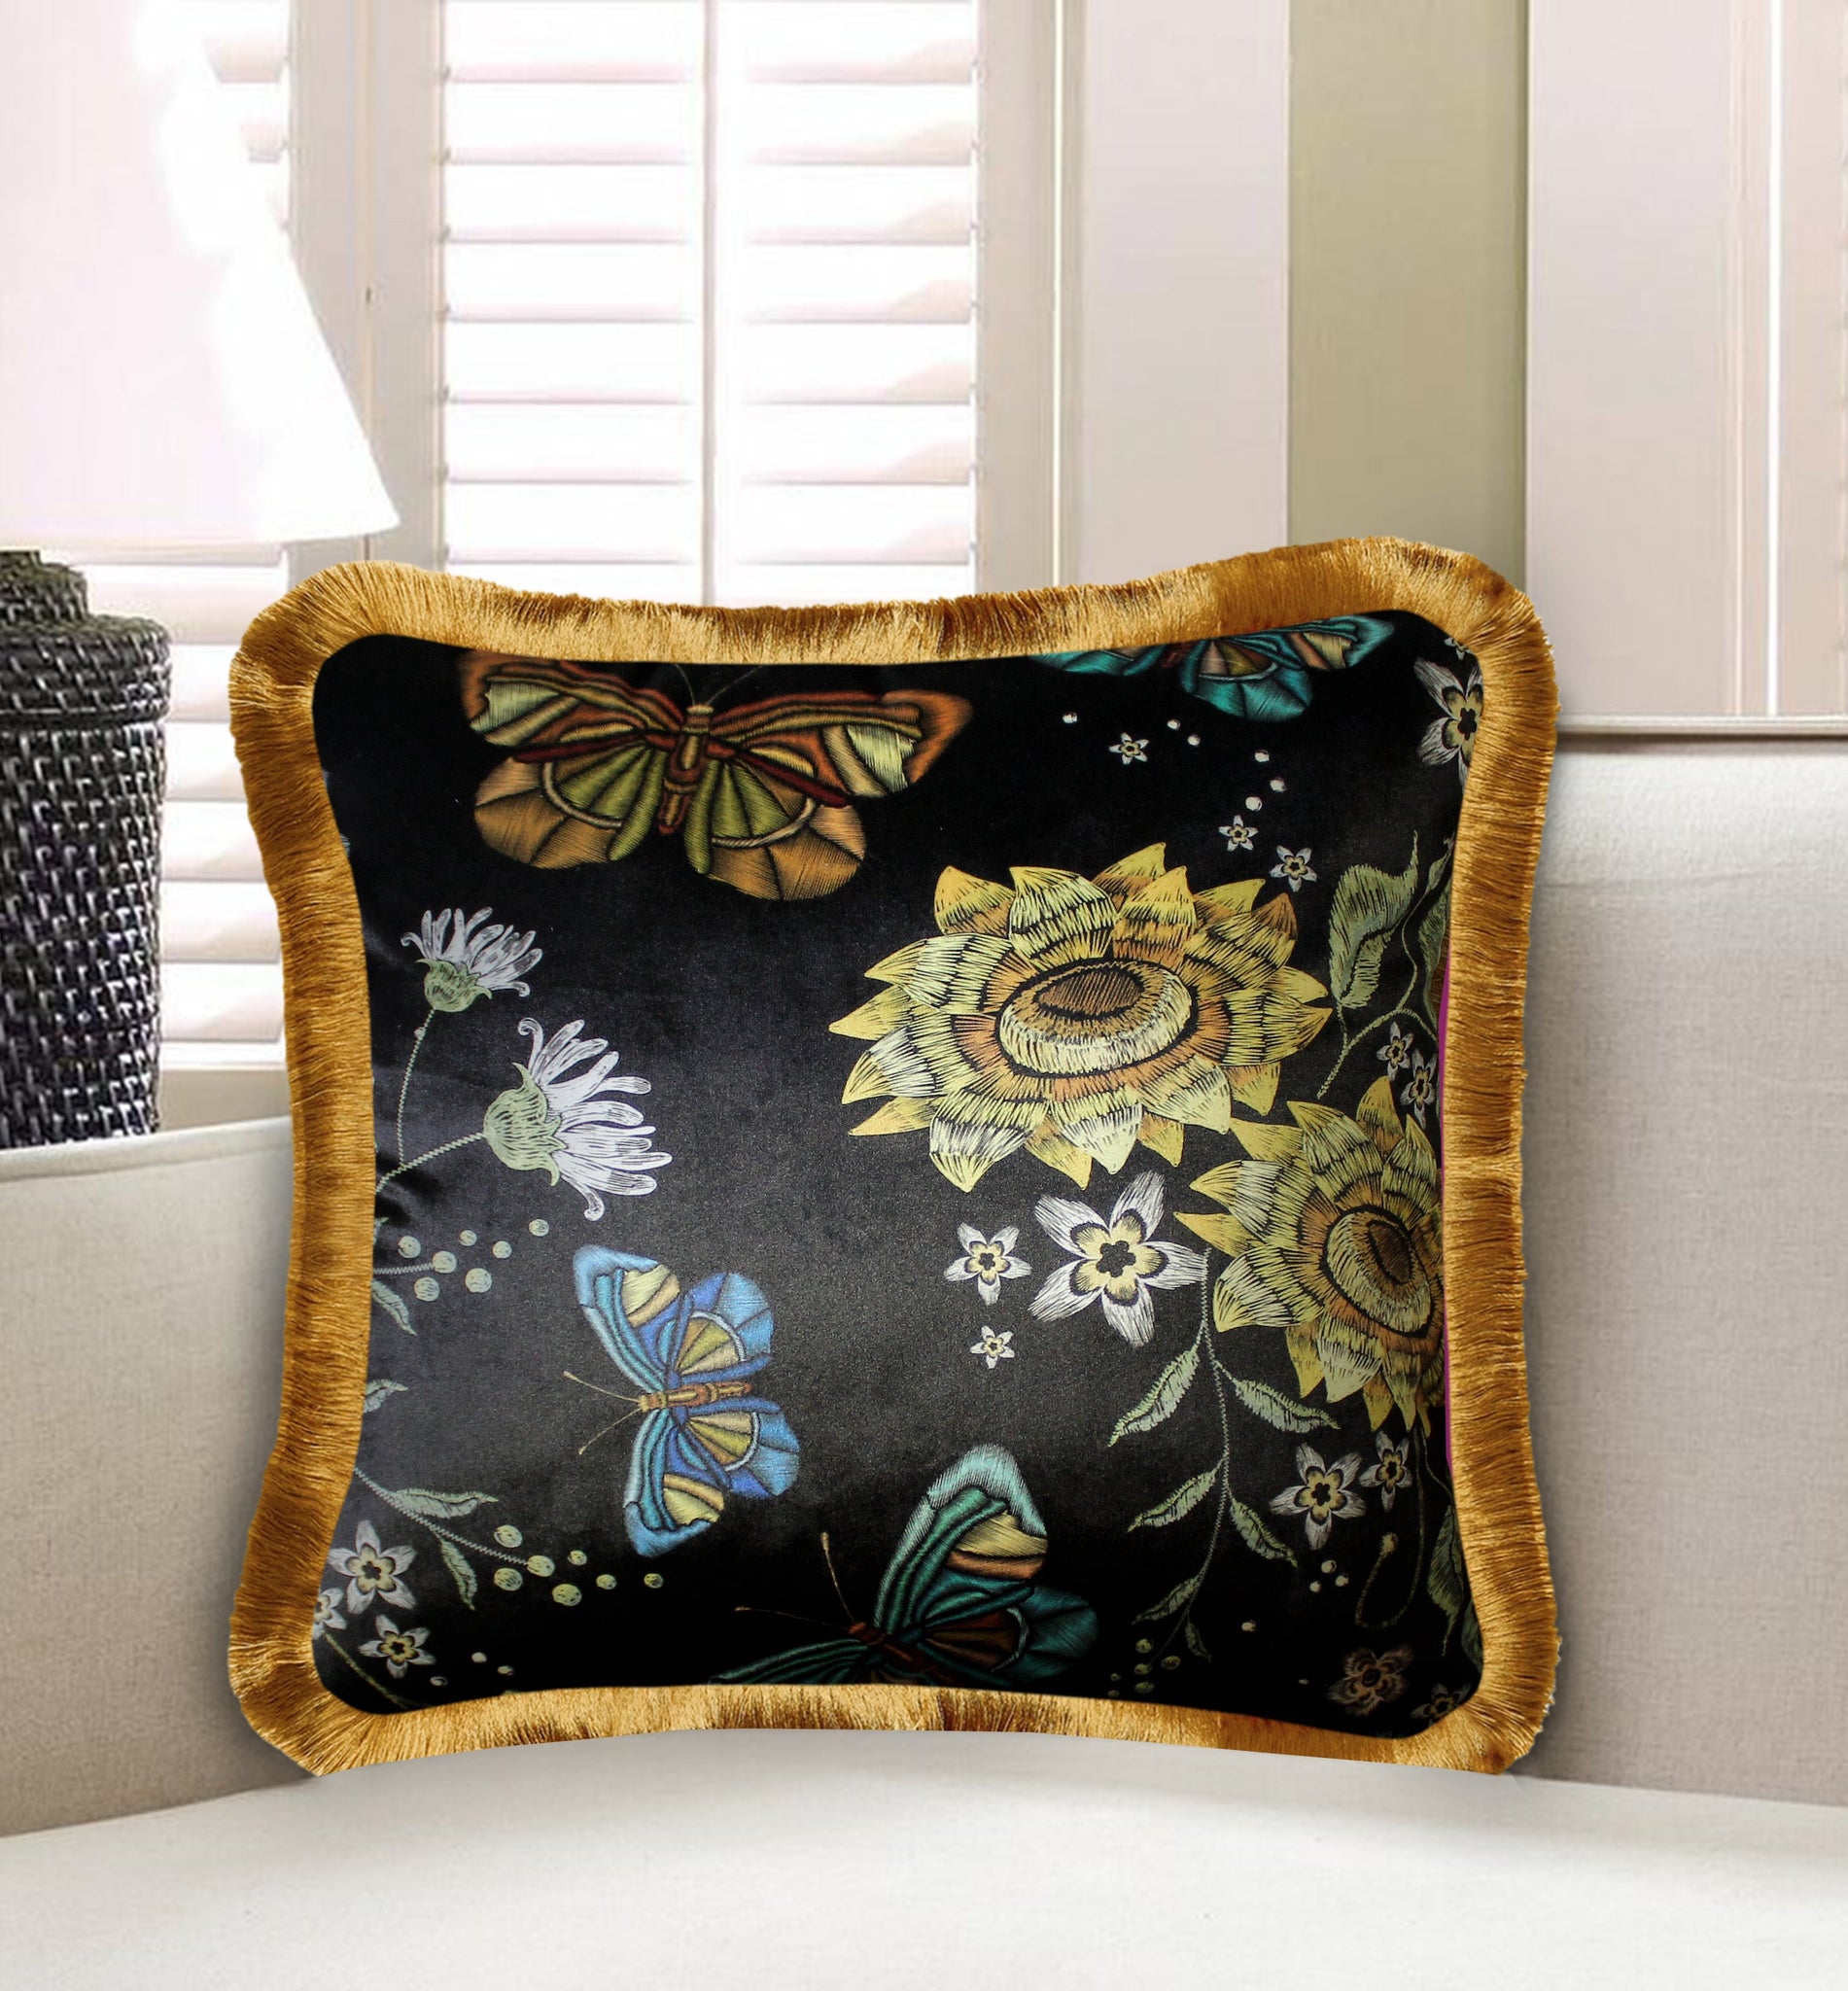 Velvet Cushion Cover Embroidery Imitated Floral and Butterfly Decorative pillowcase Flower and Insect Throw Pillow for Sofa Chair 45x45 18x18 Inches